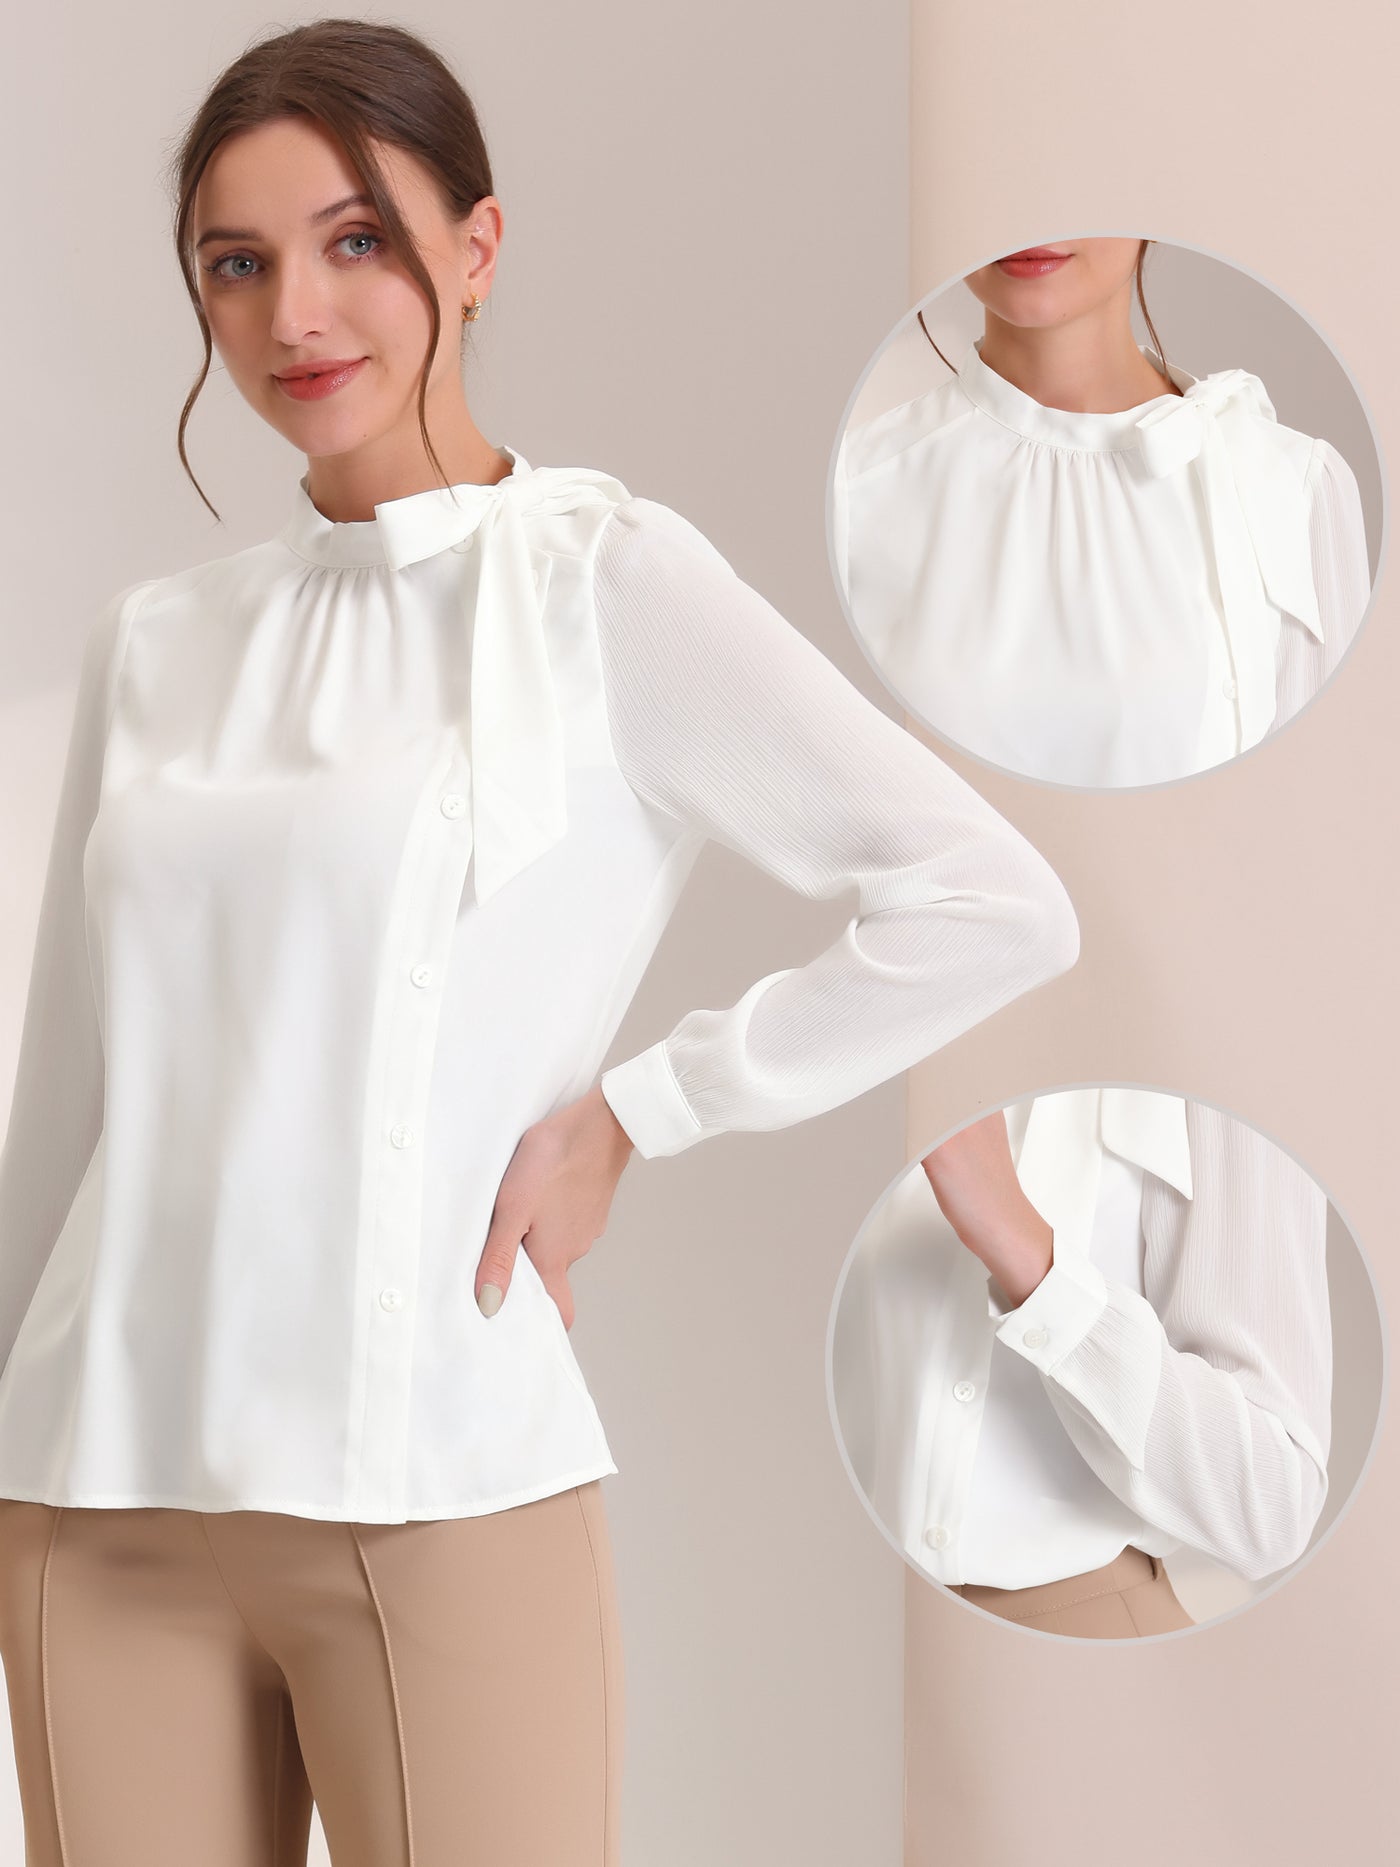 Allegra K Bow Tie Neck Blouse for Work Office Side Buttons Chiffon Elegant Tops